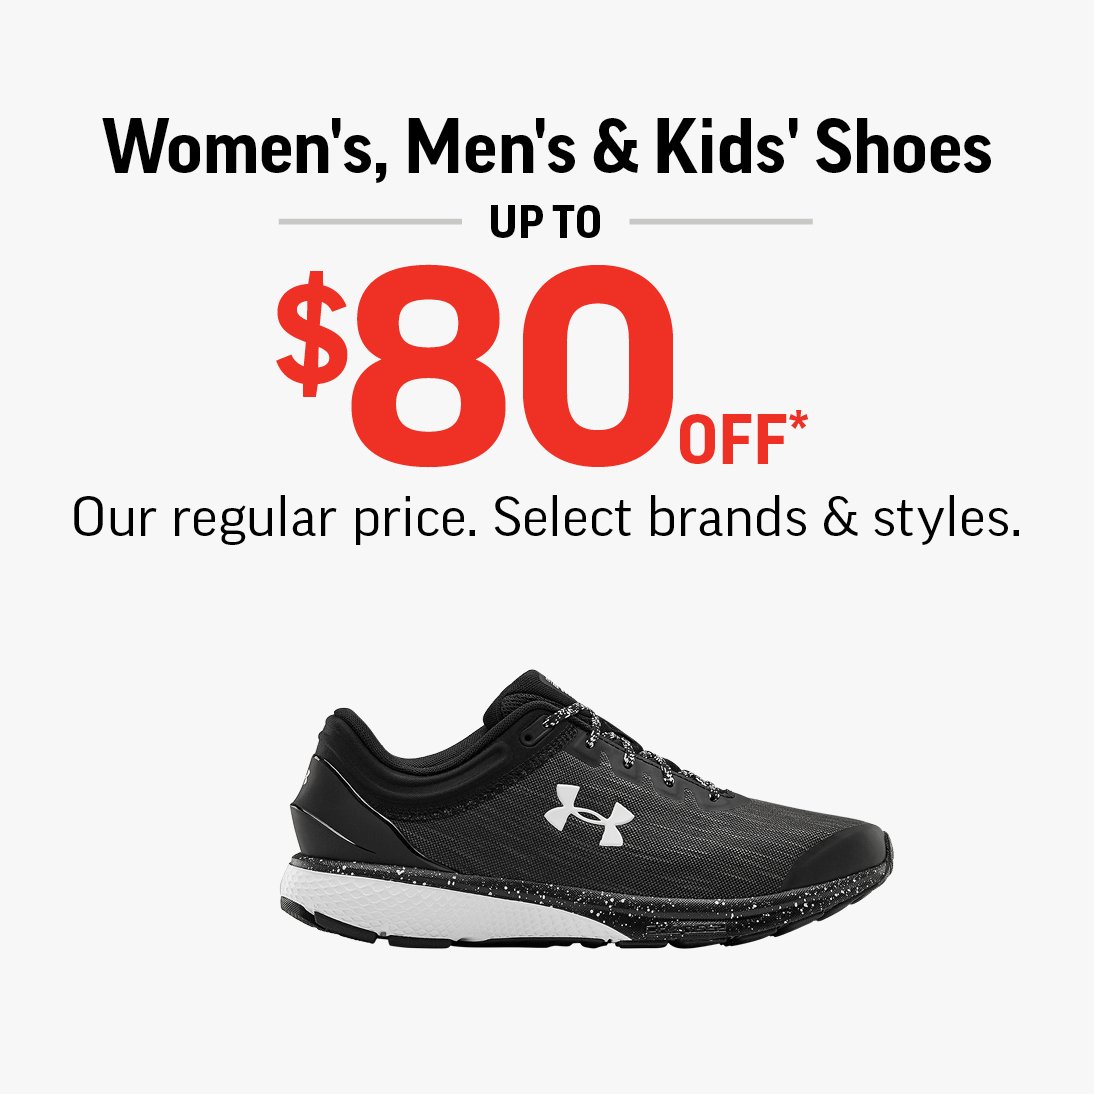 WOMEN'S, MEN'S & KIDS' SHOES UP TO $80 OFF